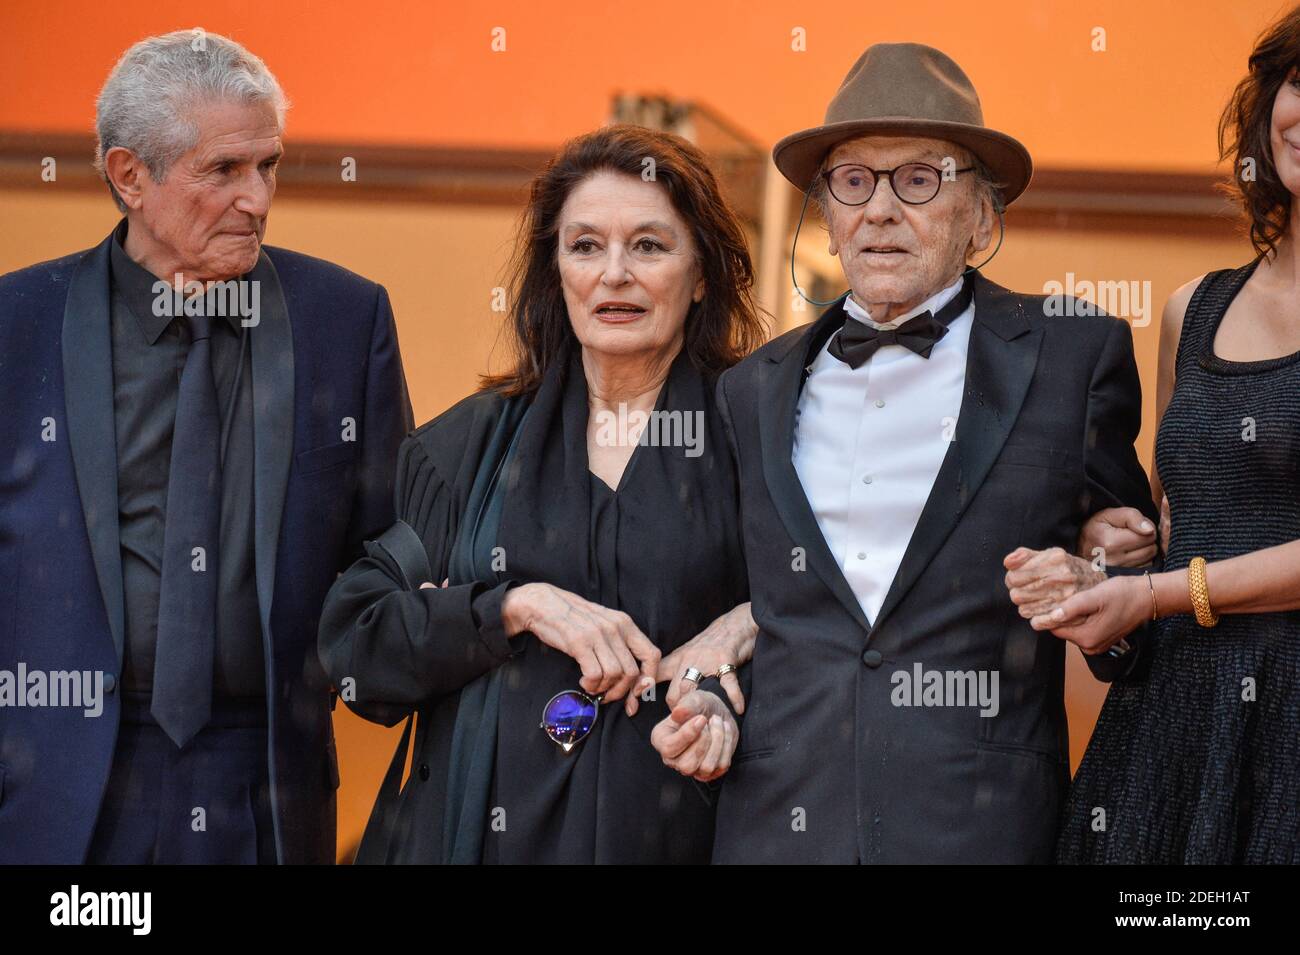 Anouk Aimee, Jean Louis Trintignant, Claude Lelouch attending the premiere  of Les Plus Belles Annees D Une Vie during 72nd Cannes Film Festival in  Cannes, France on May 18, 2019. Photo by